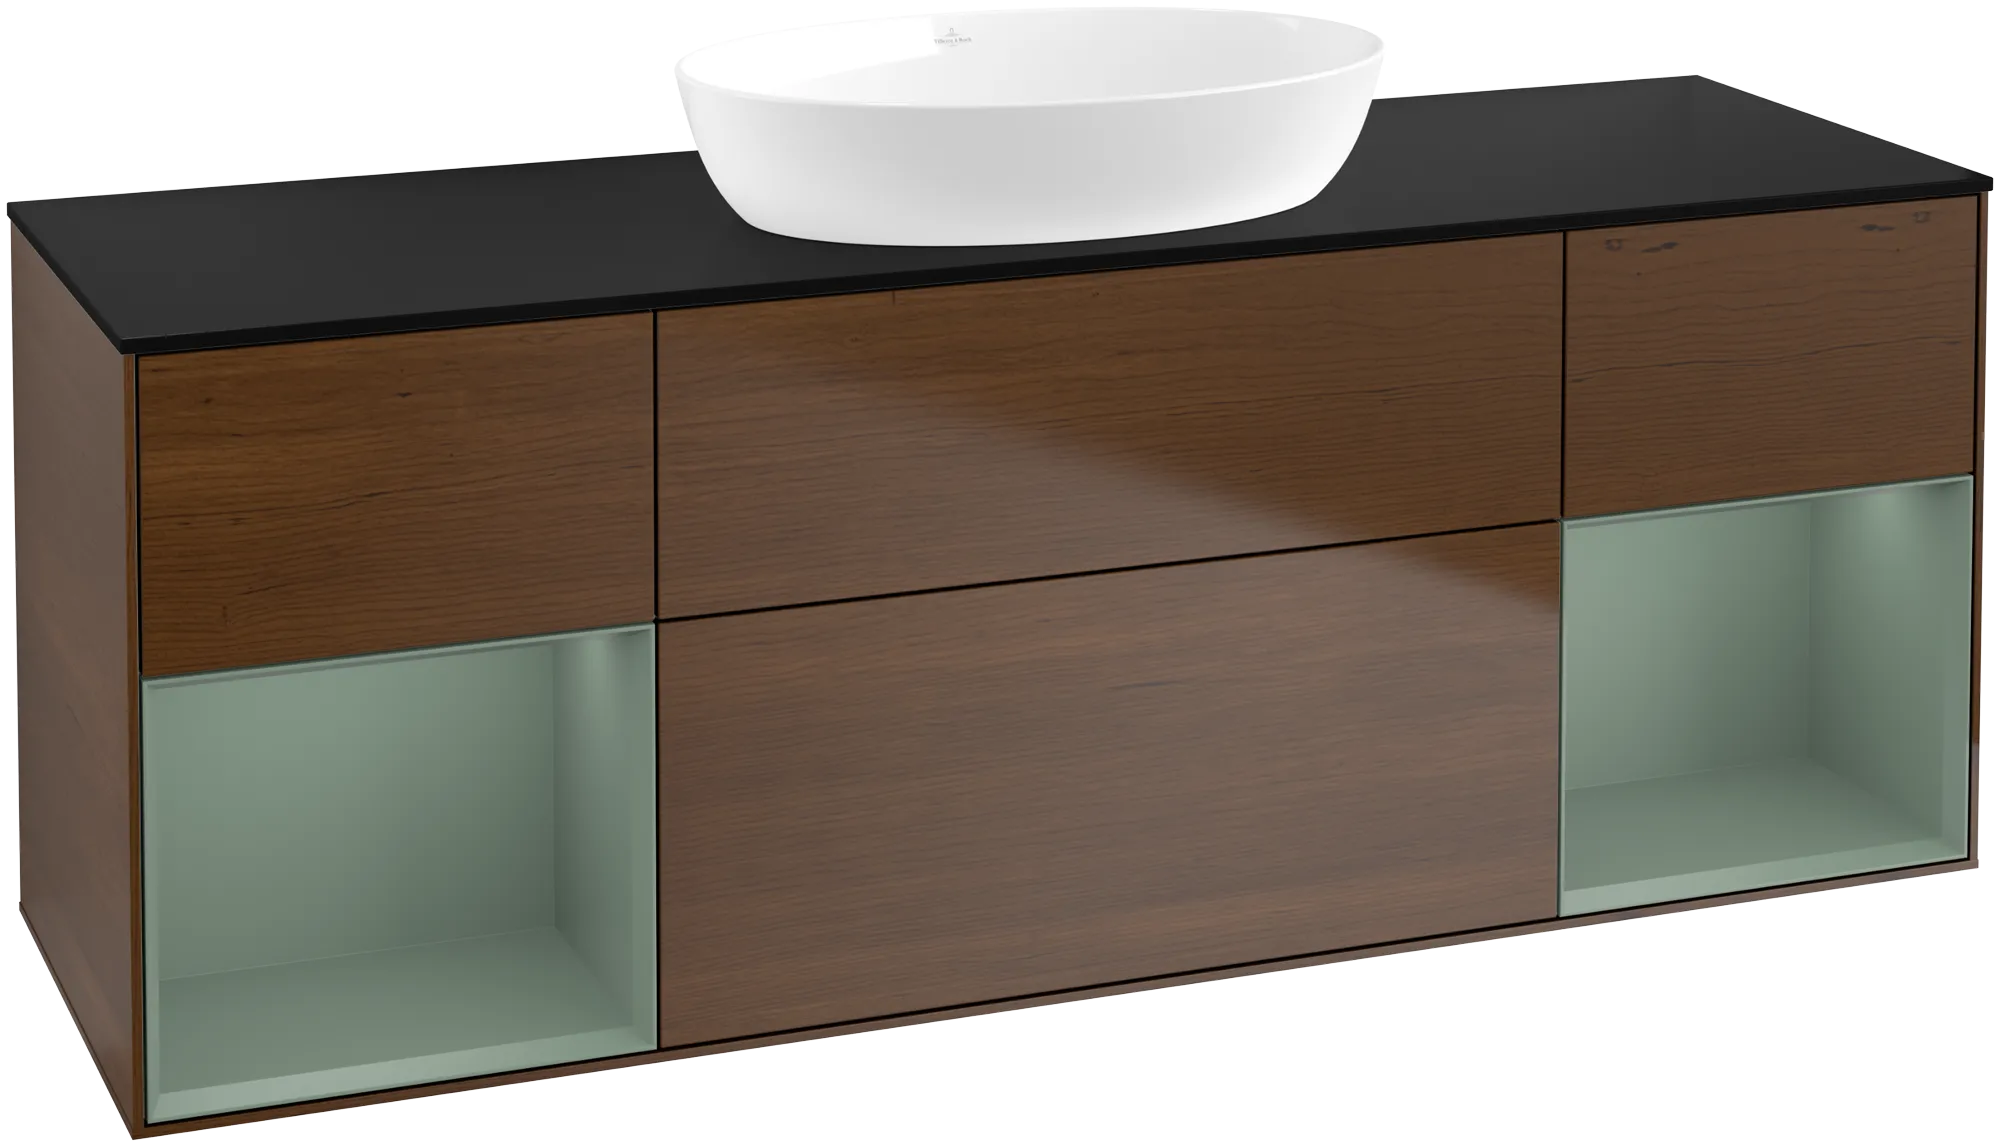 Picture of VILLEROY BOCH Finion Vanity unit, with lighting, 4 pull-out compartments, 1600 x 603 x 501 mm, Walnut Veneer / Olive Matt Lacquer / Glass Black Matt #GD02GMGN